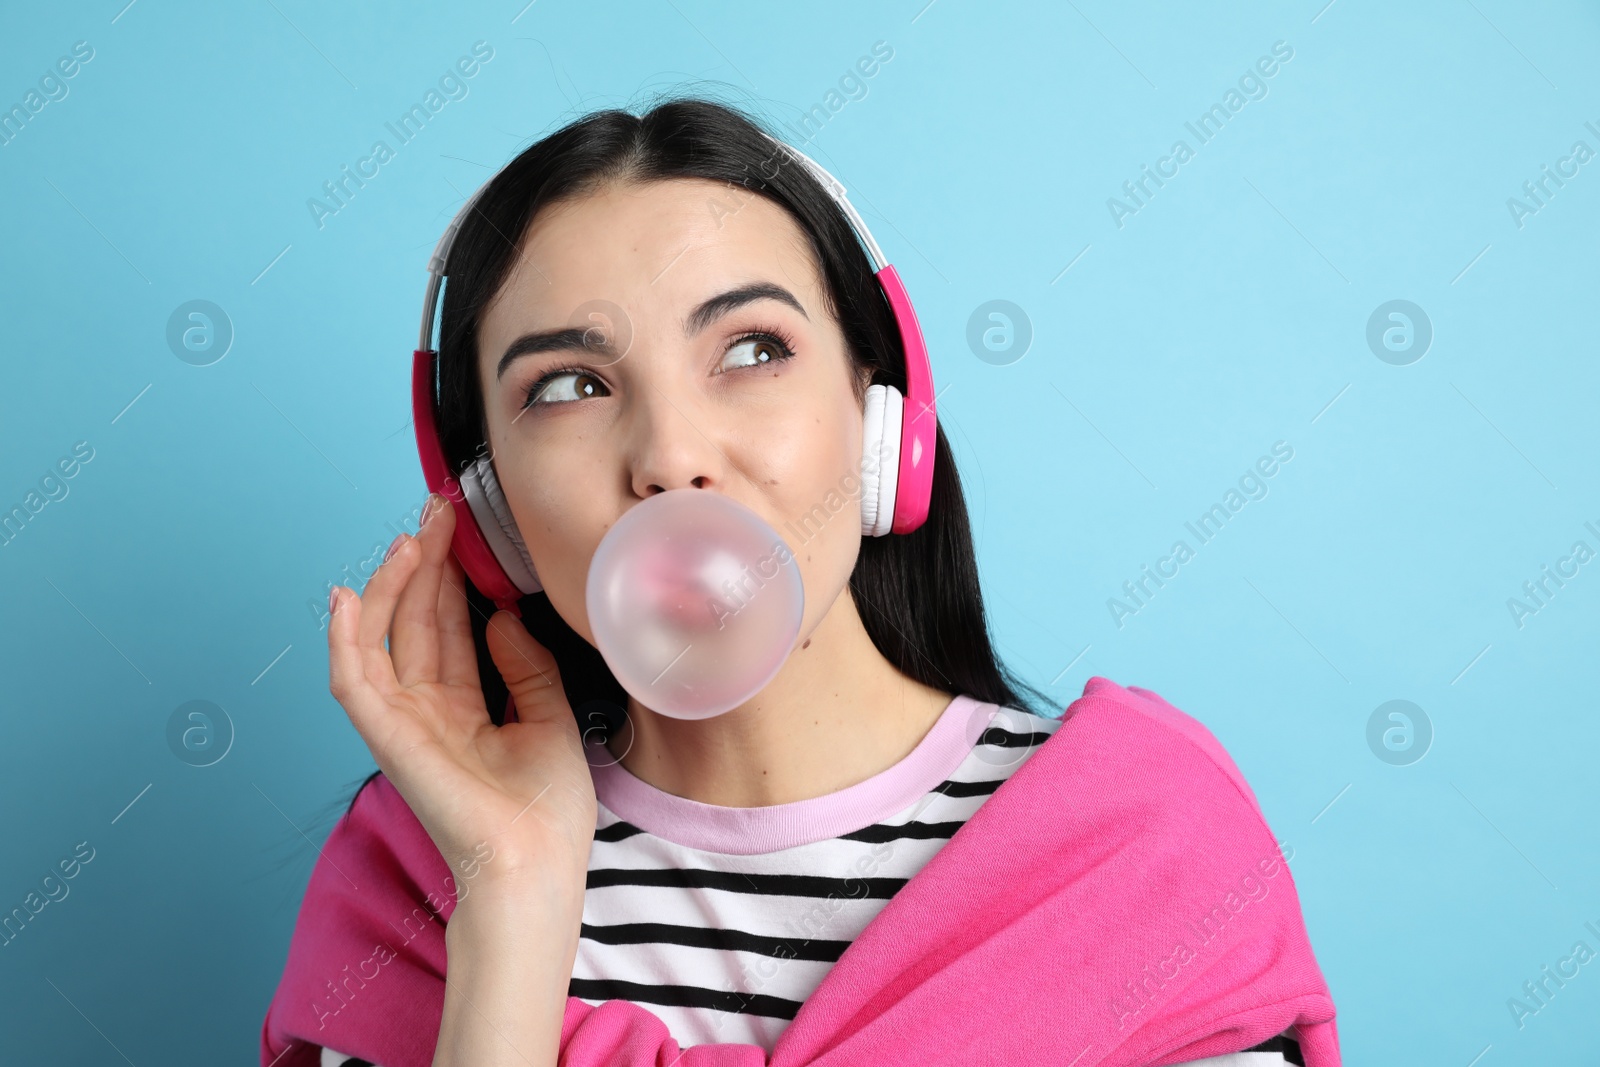 Photo of Fashionable young woman with headphones blowing bubblegum on light blue background